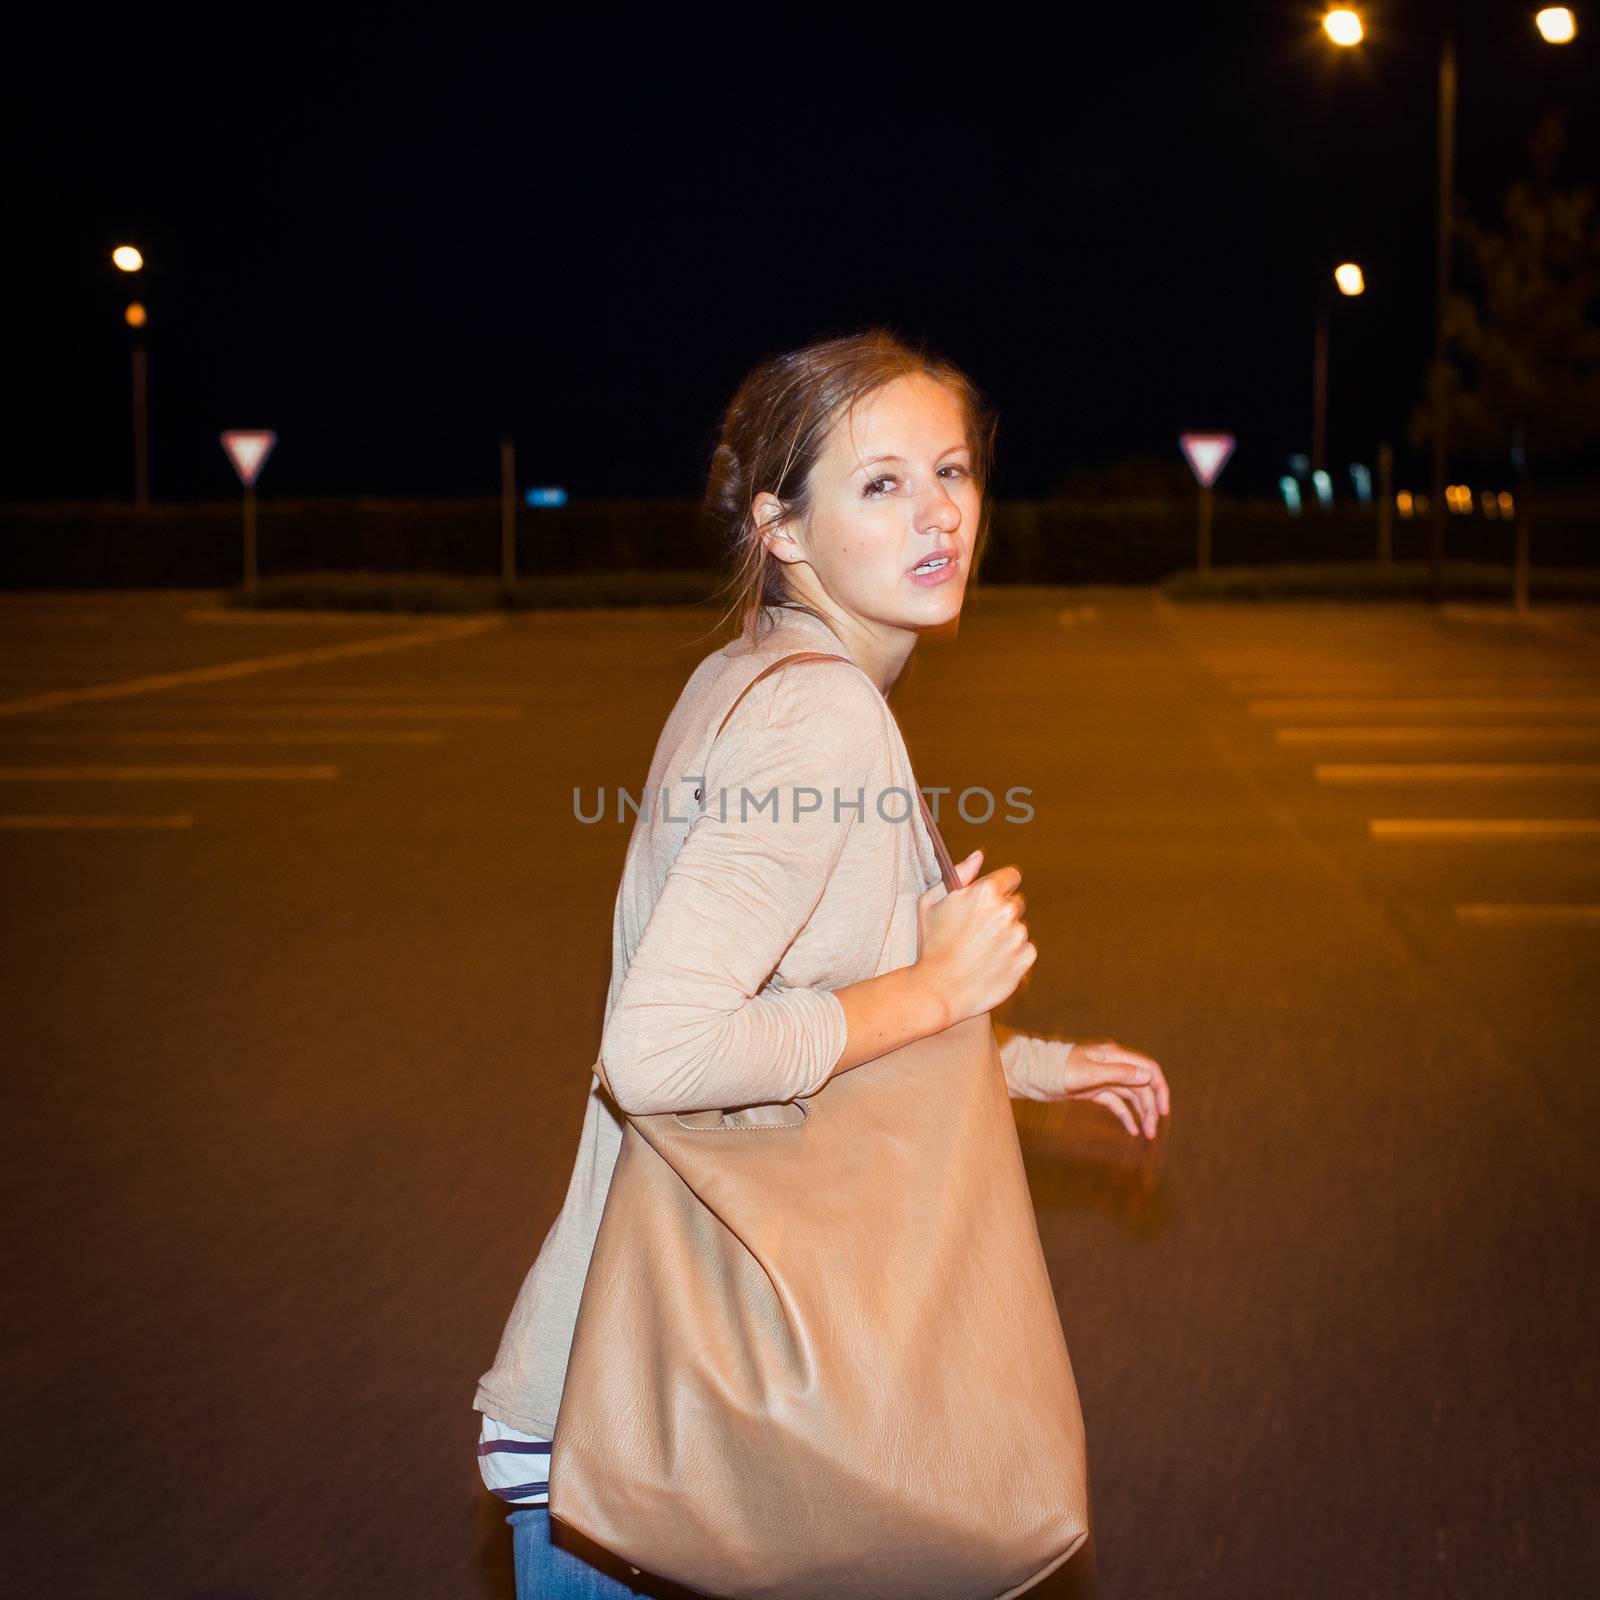 Scared young woman running from her pursuer in a deserted parkin by viktor_cap